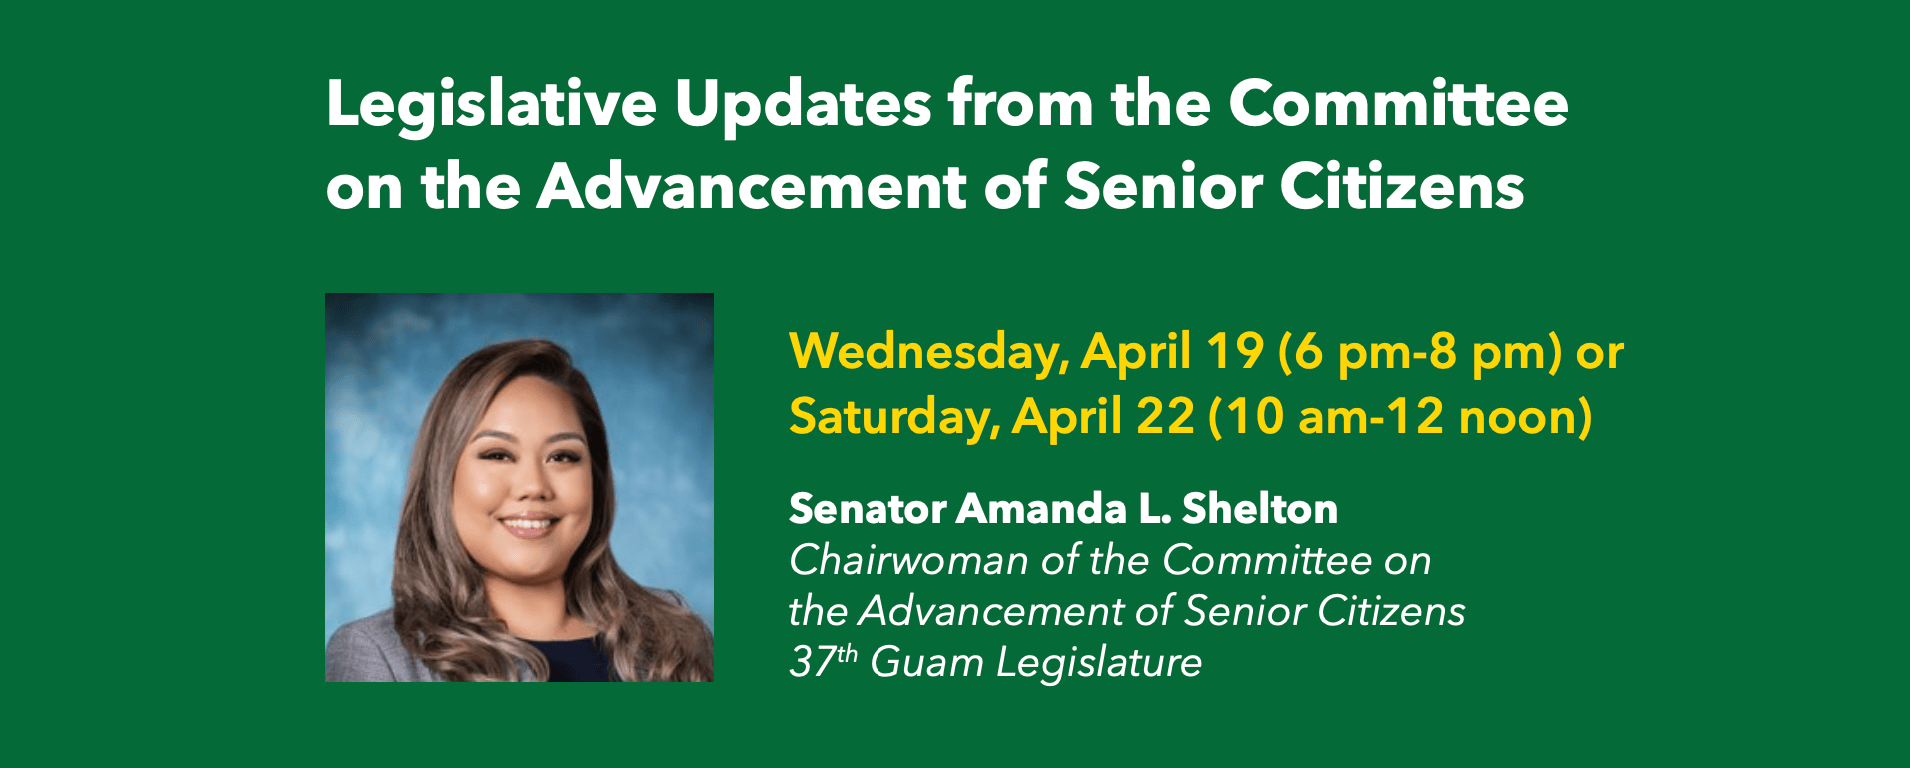 Banner for Updates from Committee on the Advancement of Senior Citizens